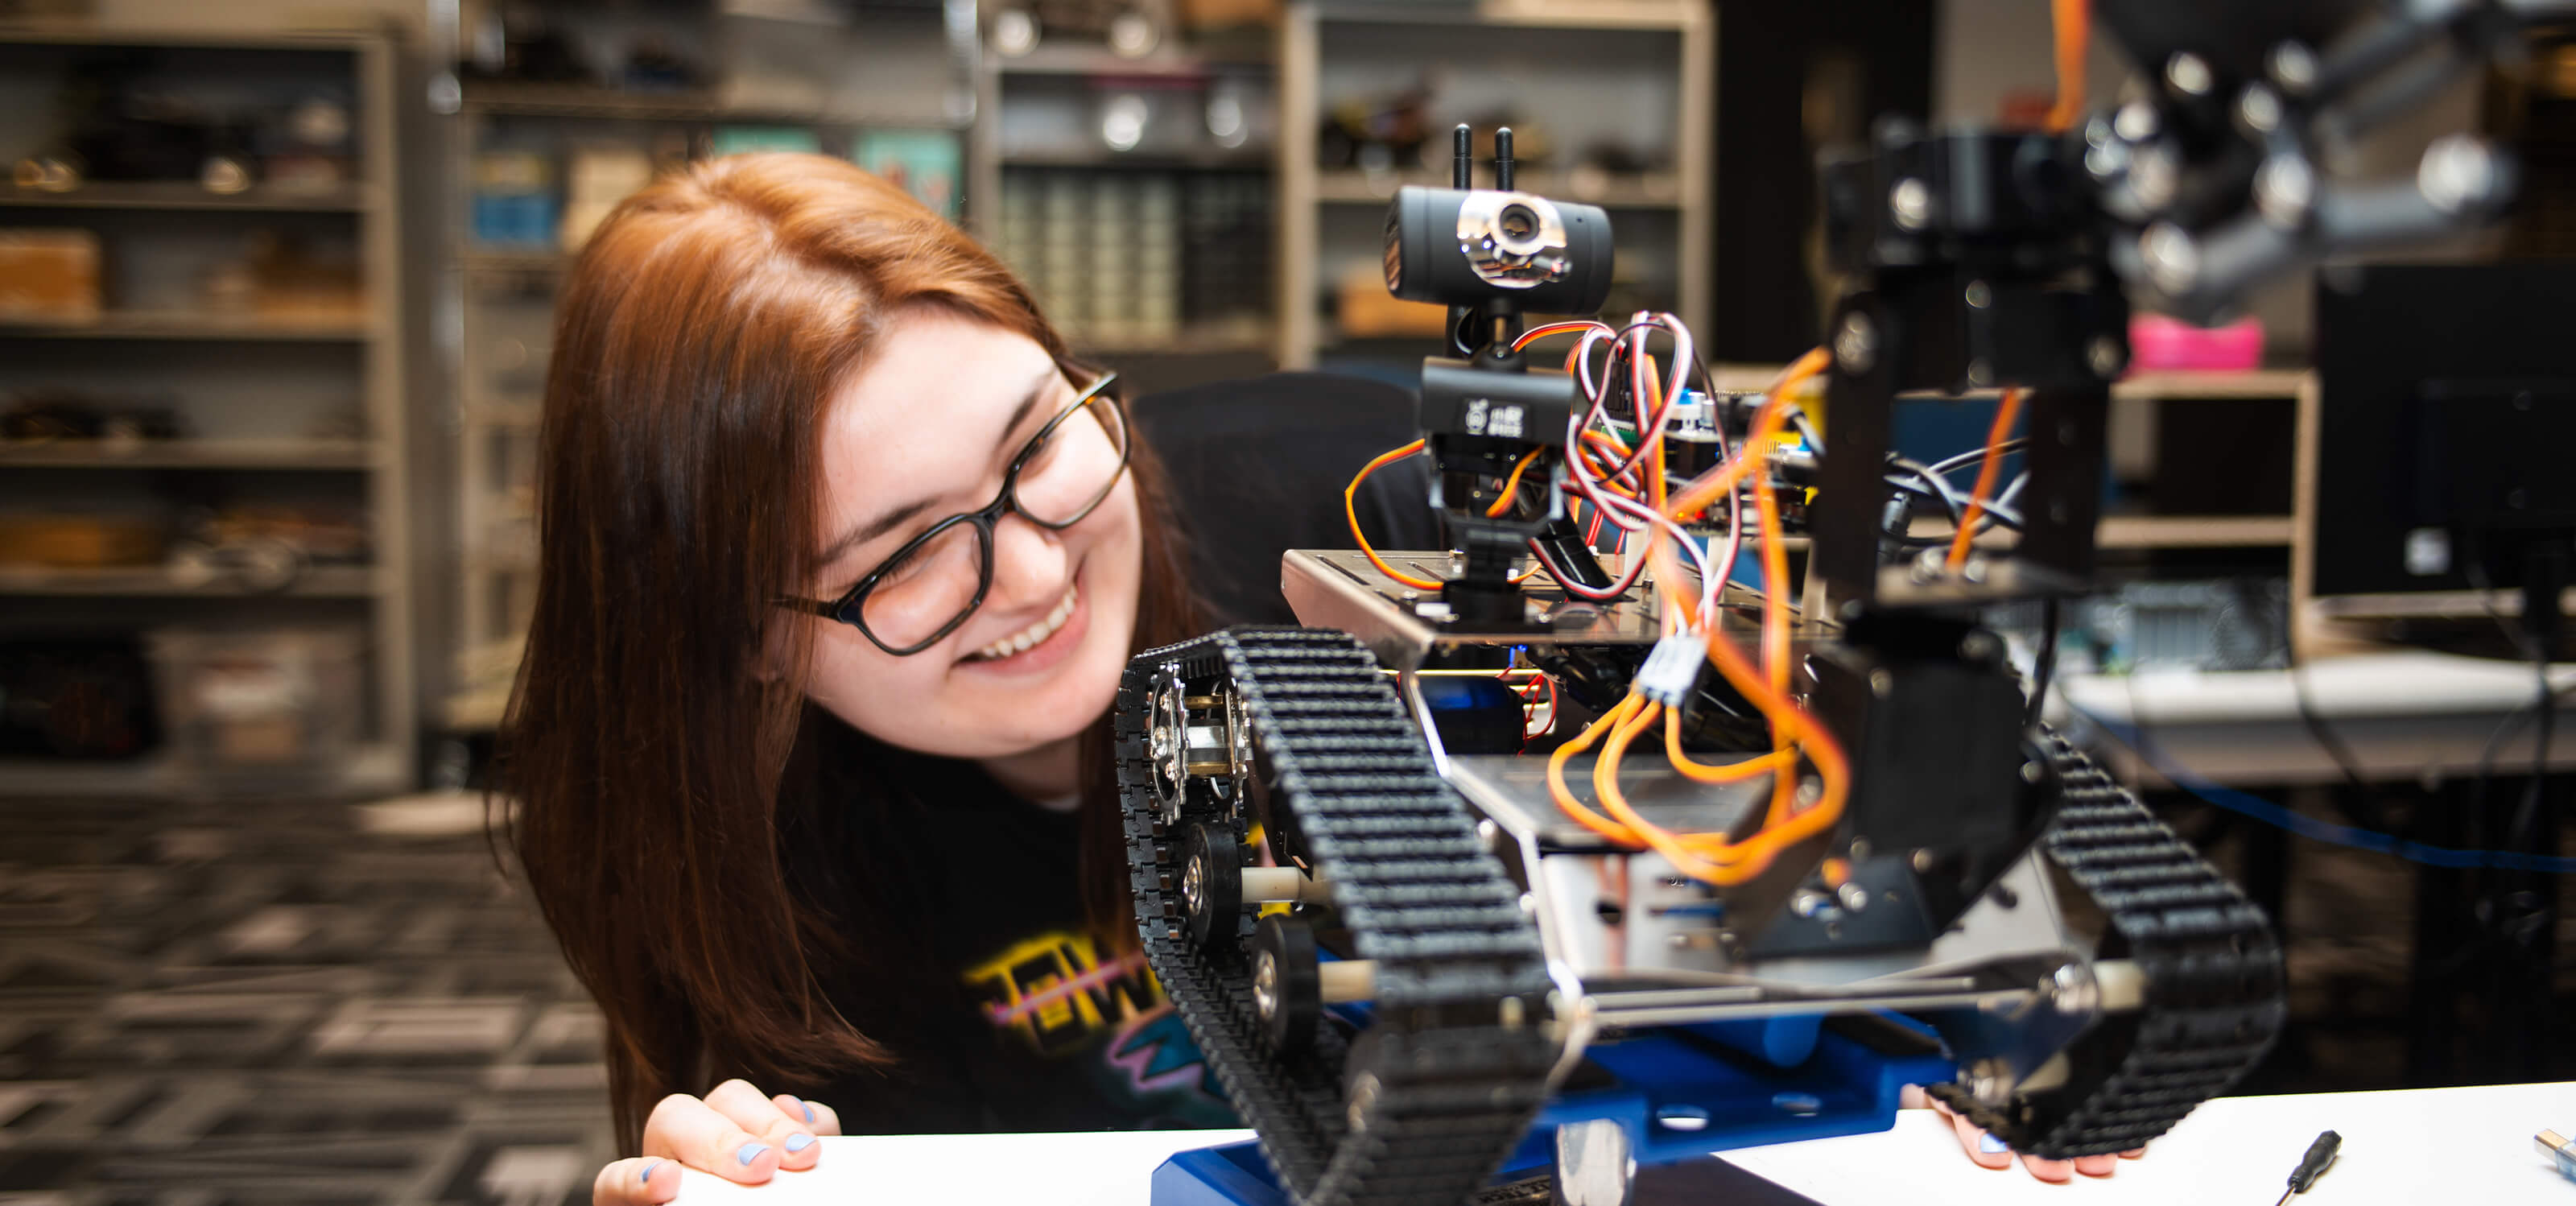 A DigiPen student smiles as she examines her robot